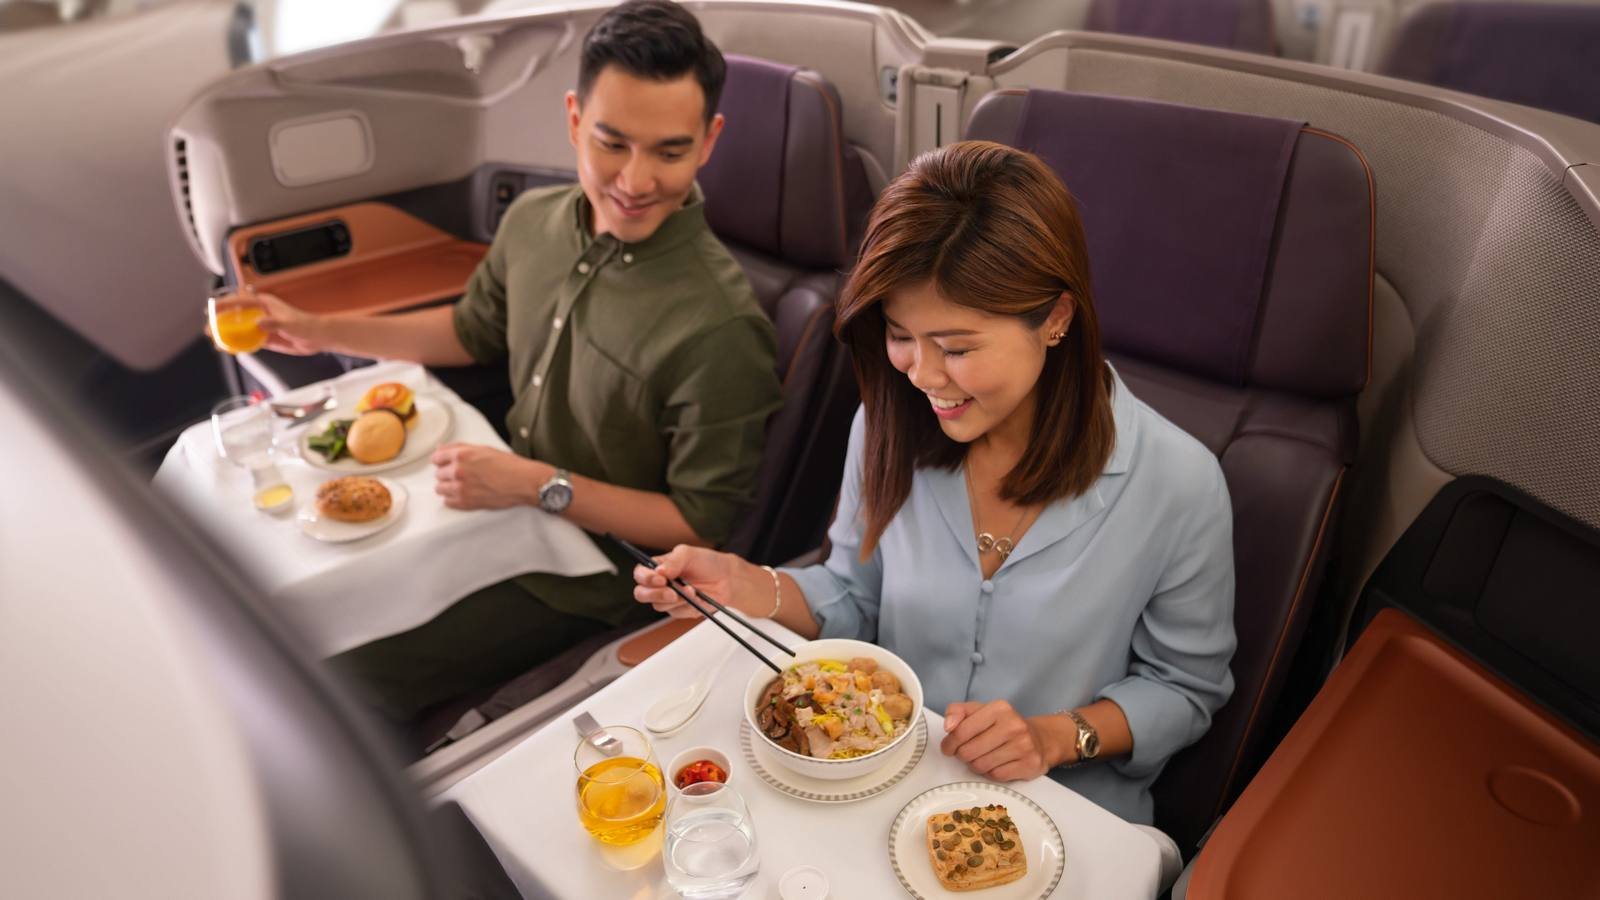 As no one is flying anymore, Singapore Airlines is converting its uber luxurious business class section on the Airbus A380 into a fine dine restaurant